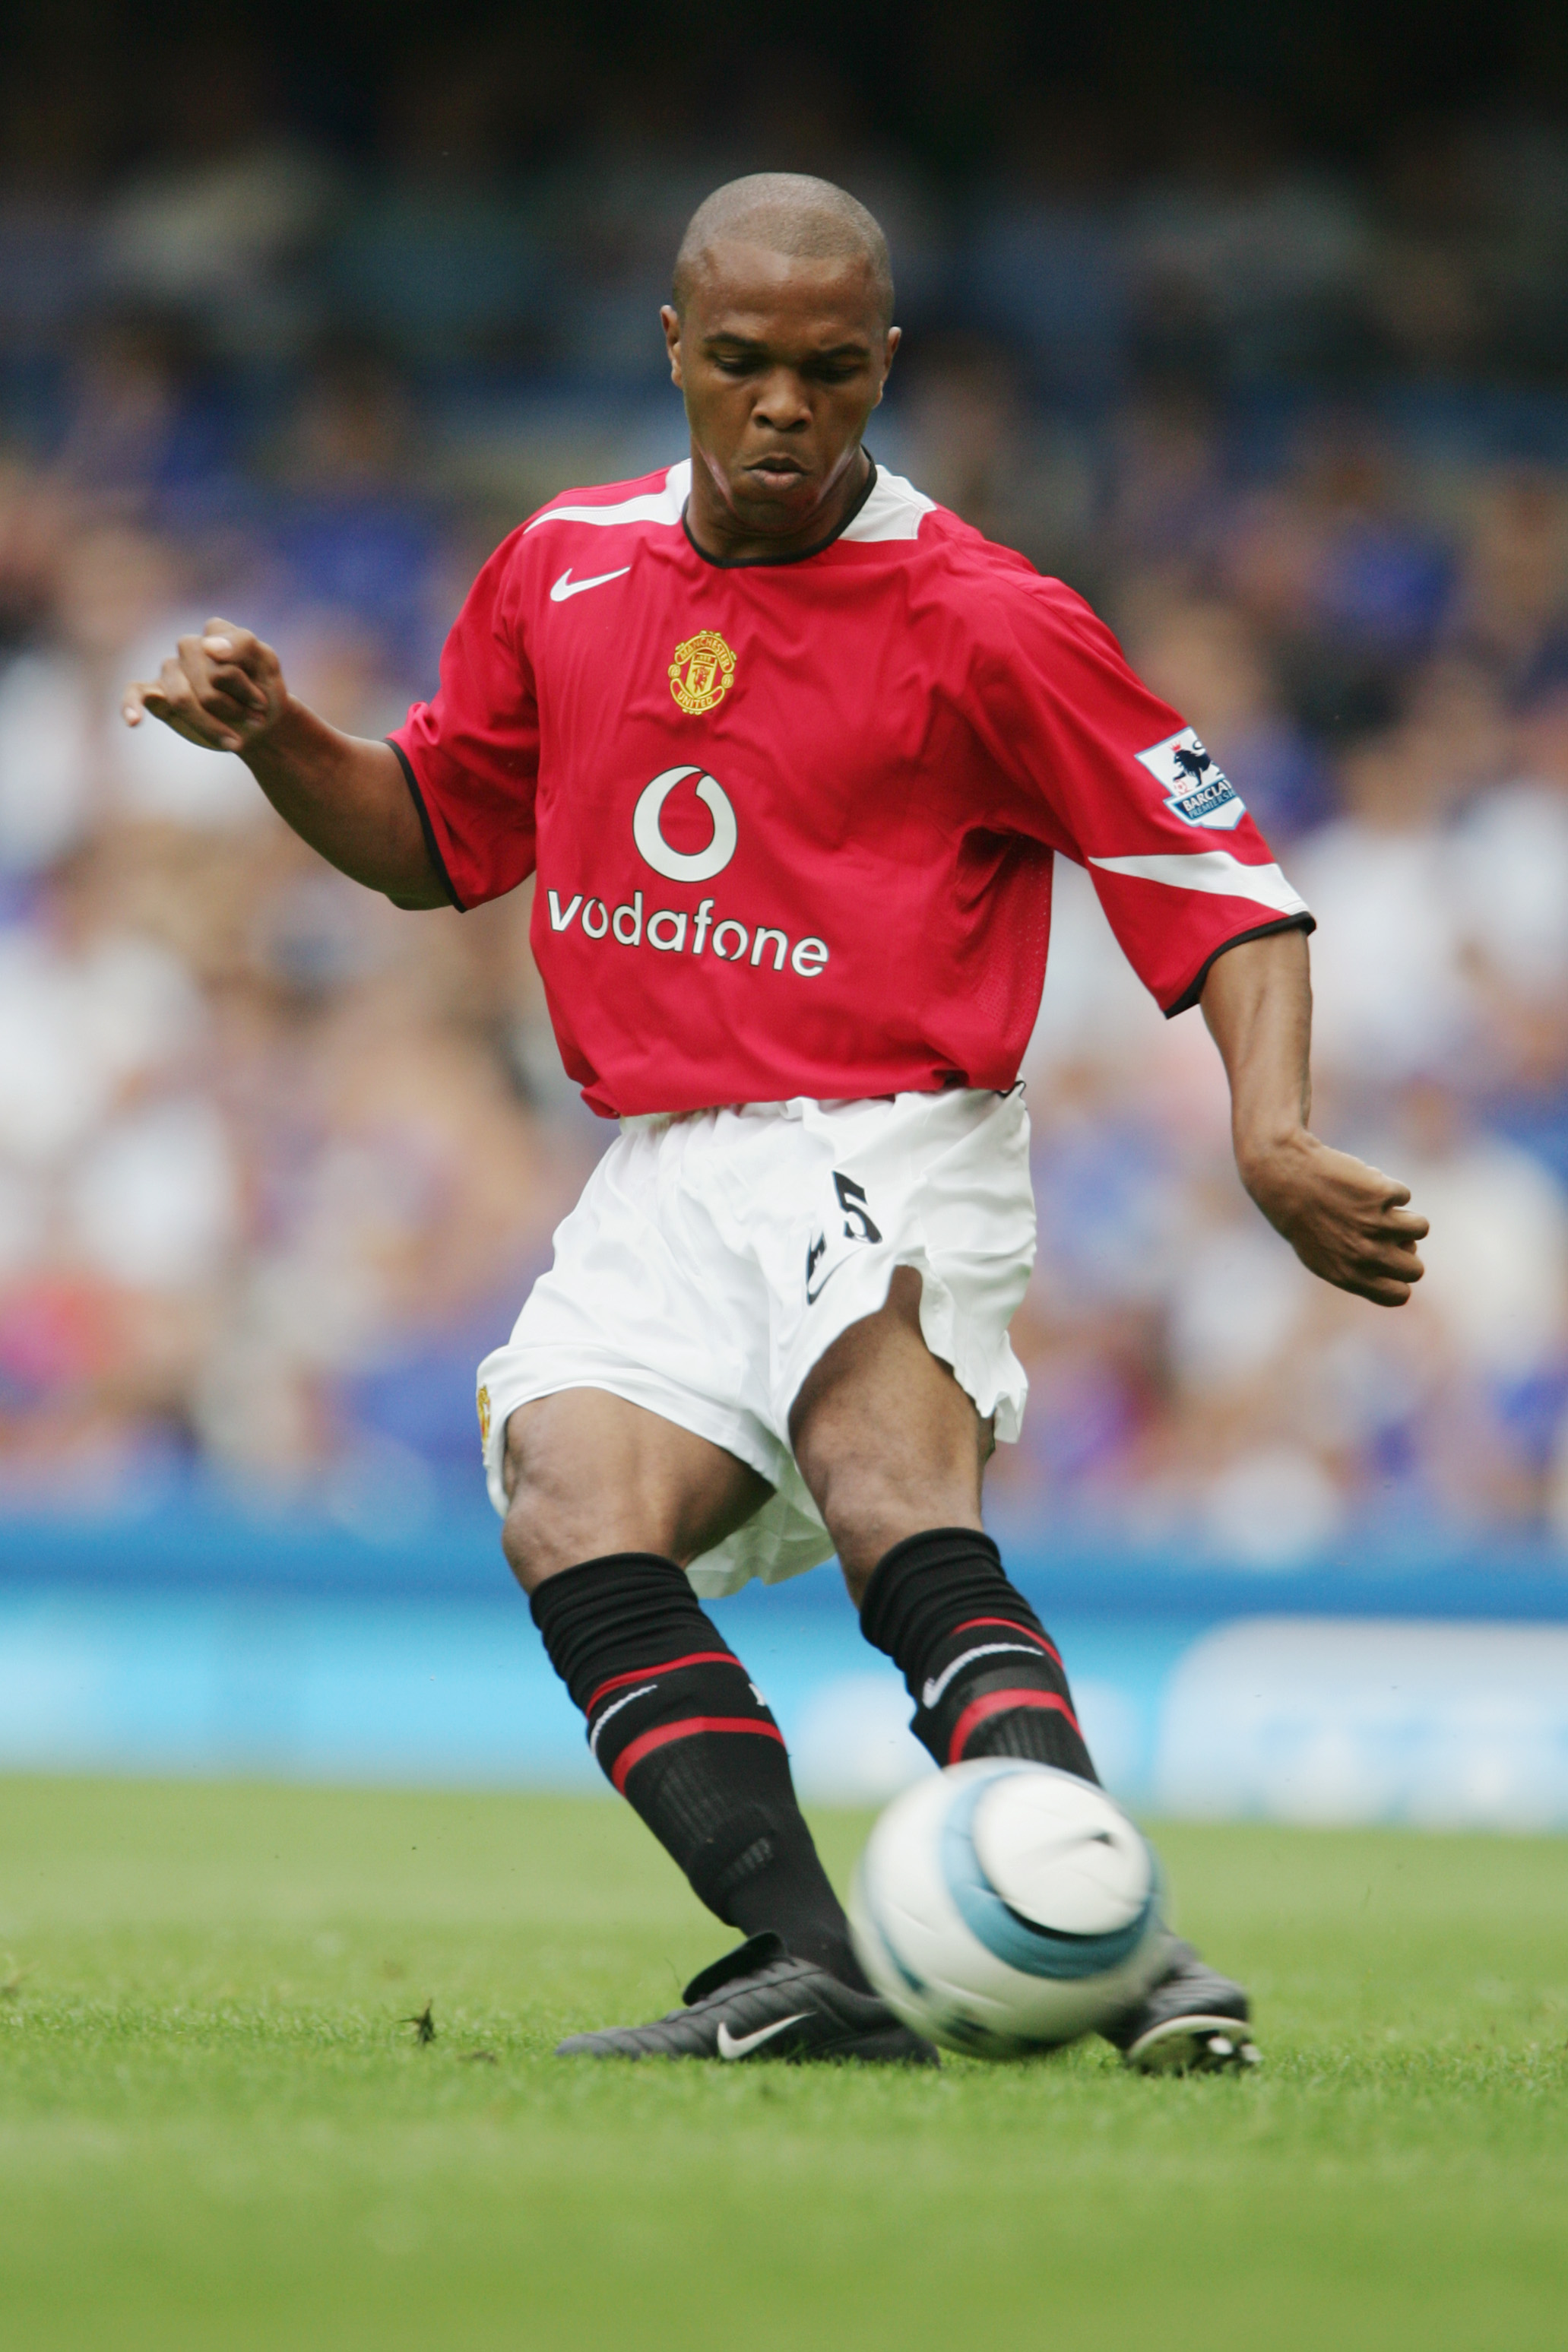 LONDON - AUGUST 15:  Quinton Fortune of Manchester United in action during the Barclays Premiership match between Chelsea and Manchester United at Stamford Bridge on August 15, 2004 in London. (Photo by Phil Cole/Getty Images)